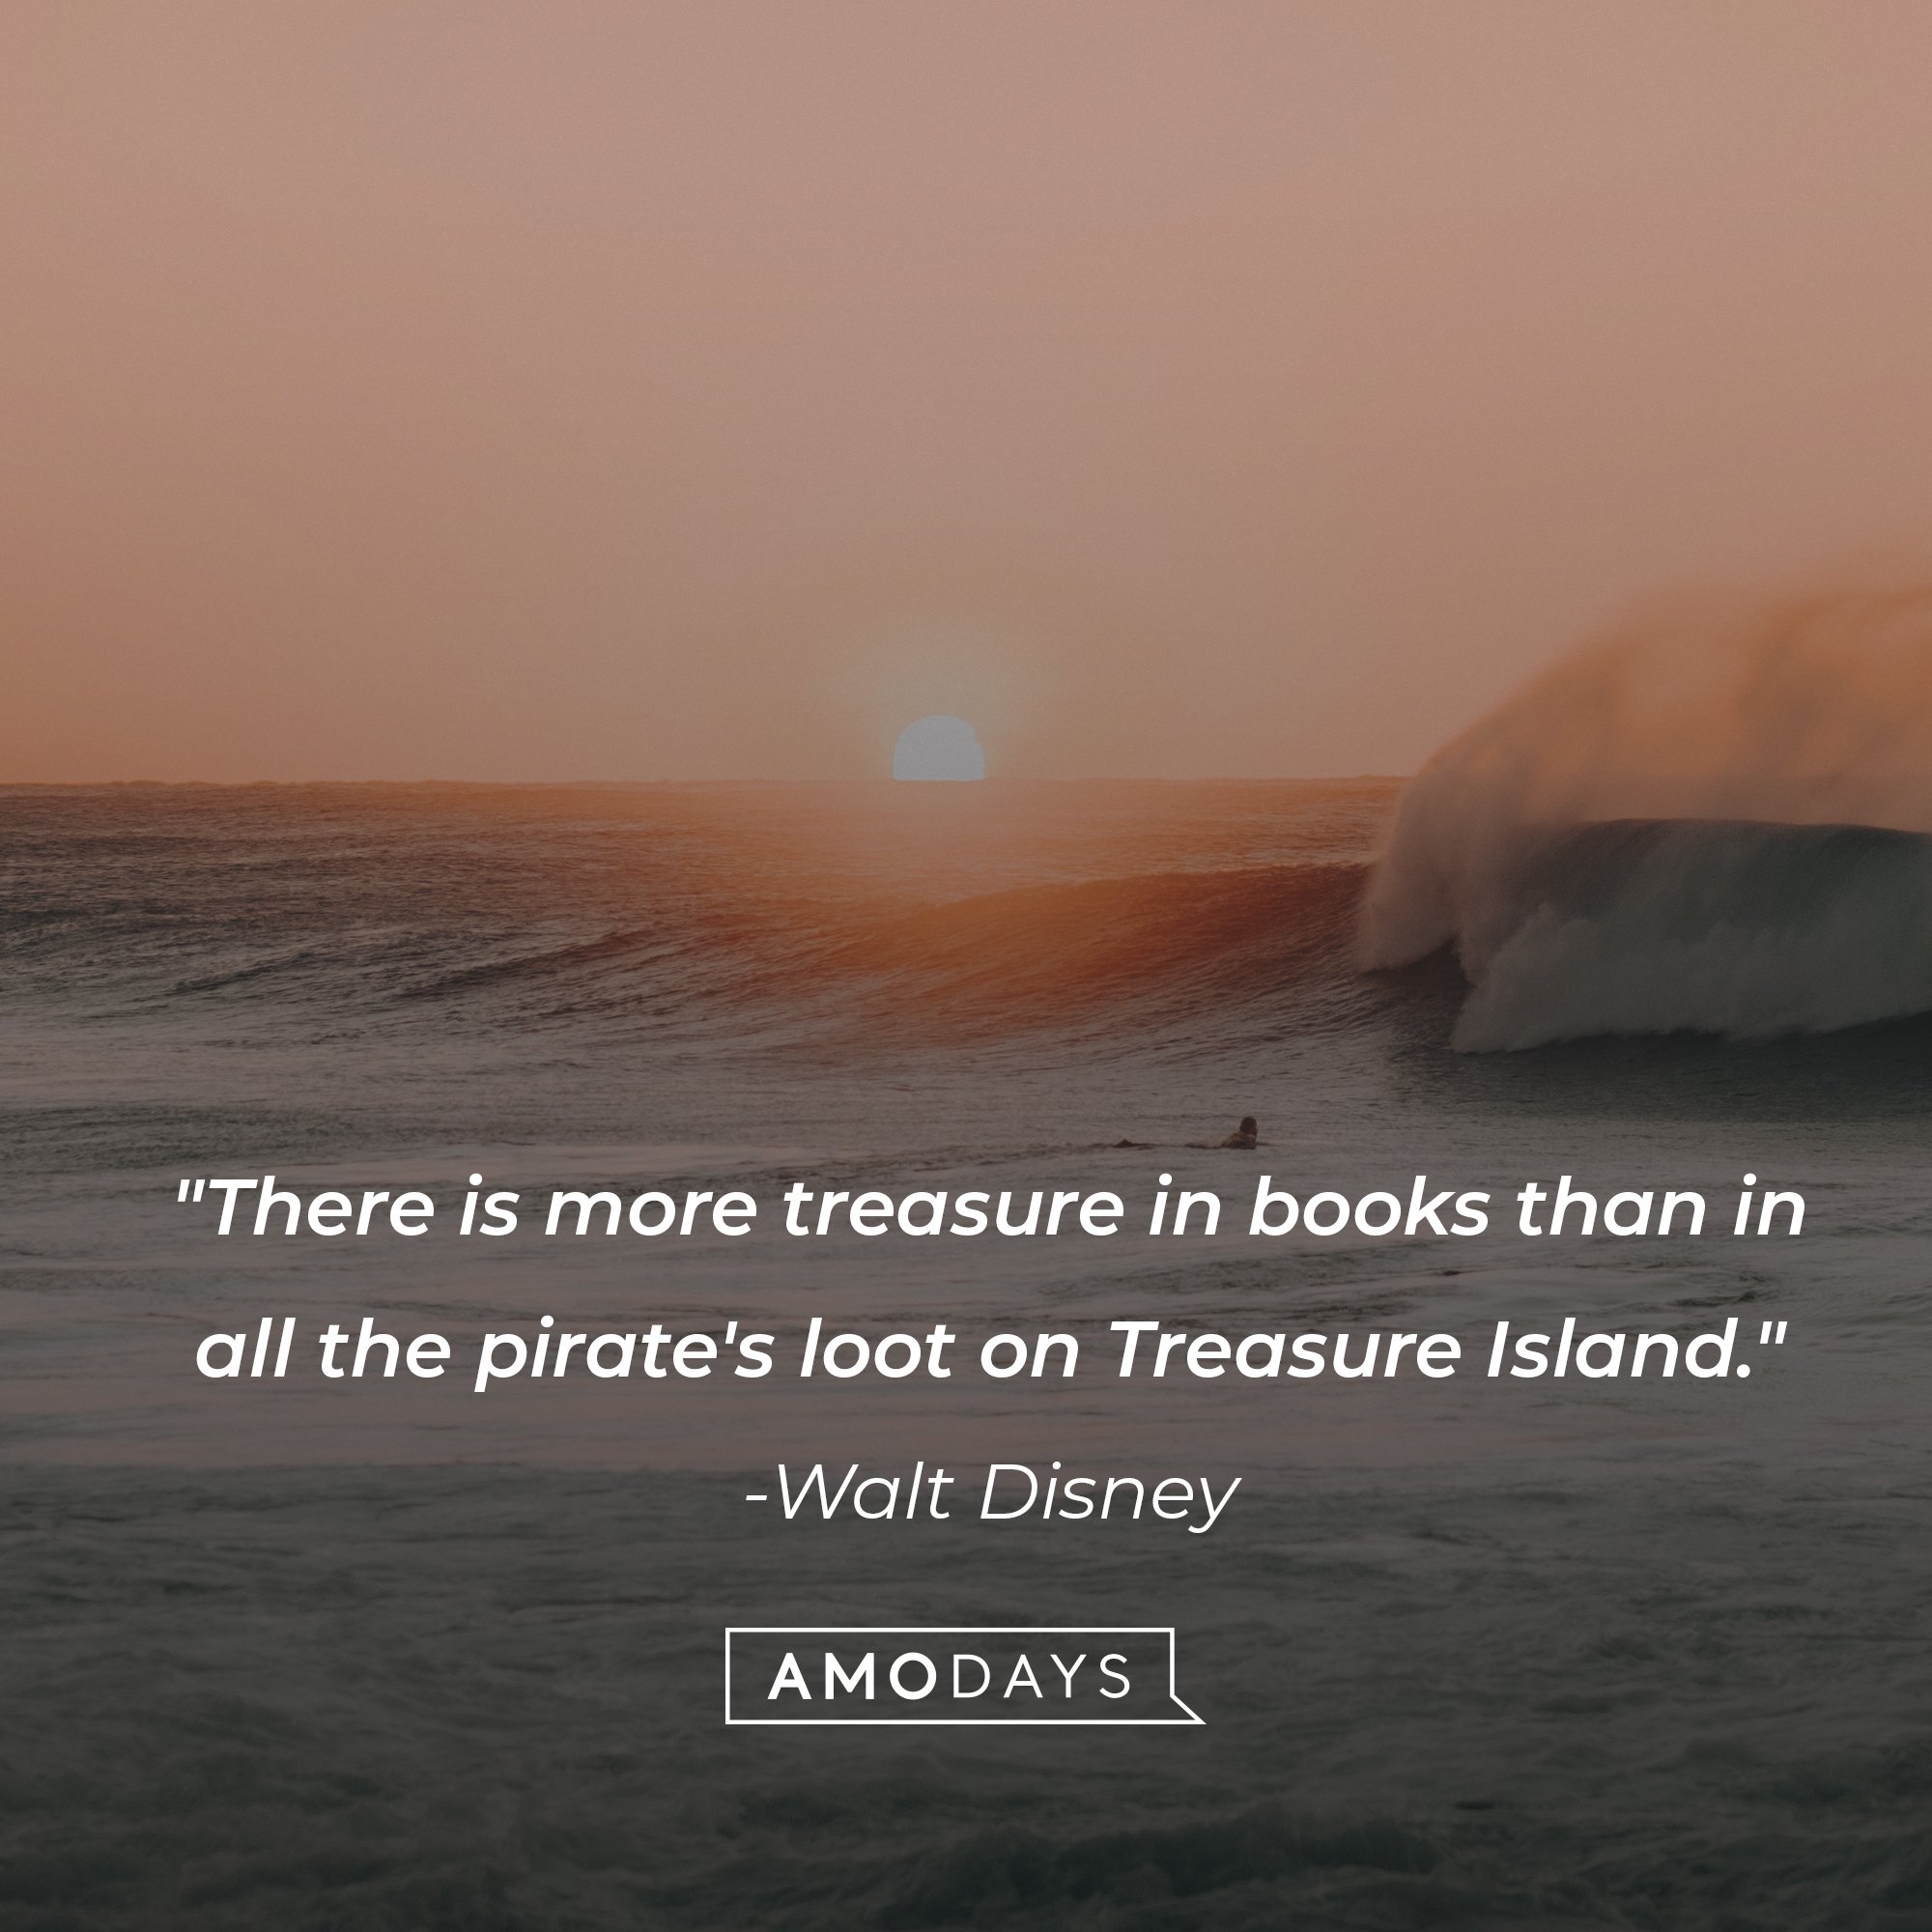 Walt Disney's quote: "There is more treasure in books than in all the pirate's loot on Treasure Island." | Image: AmoDays